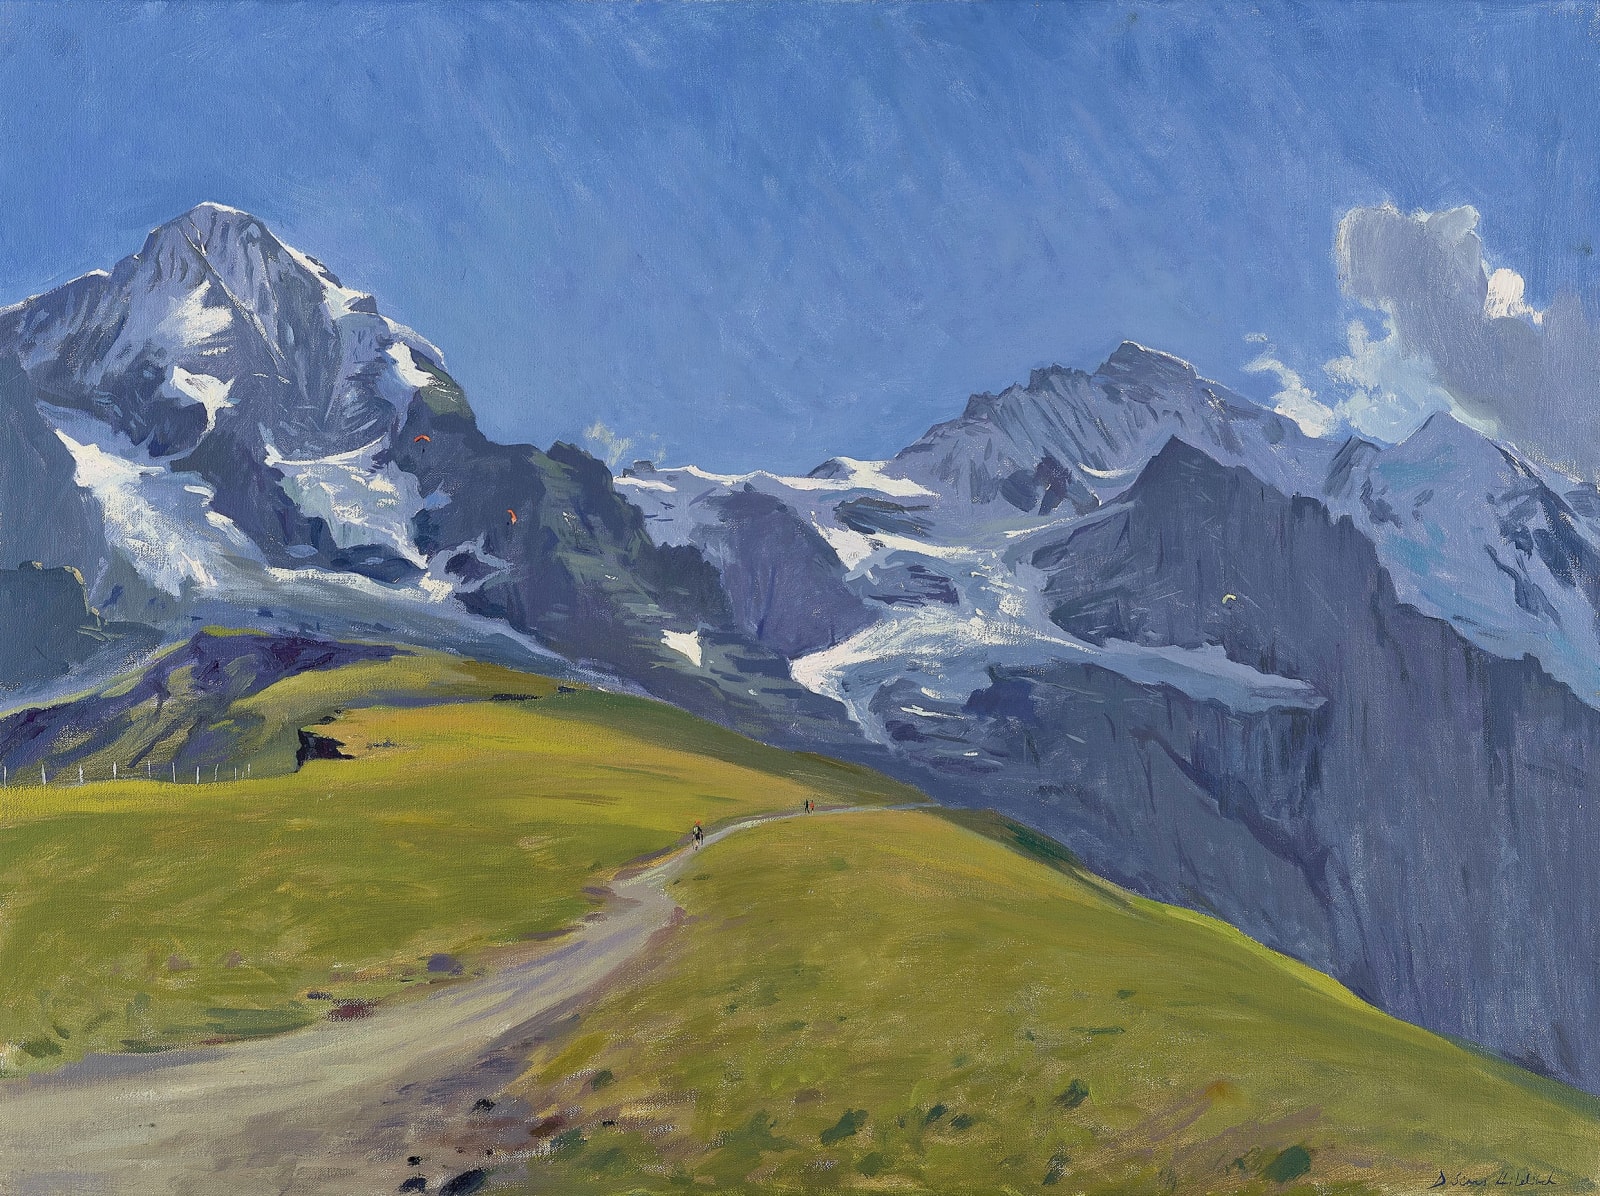 Daisy Sims Hilditch, Paragliders by the Monch and Jungfrau